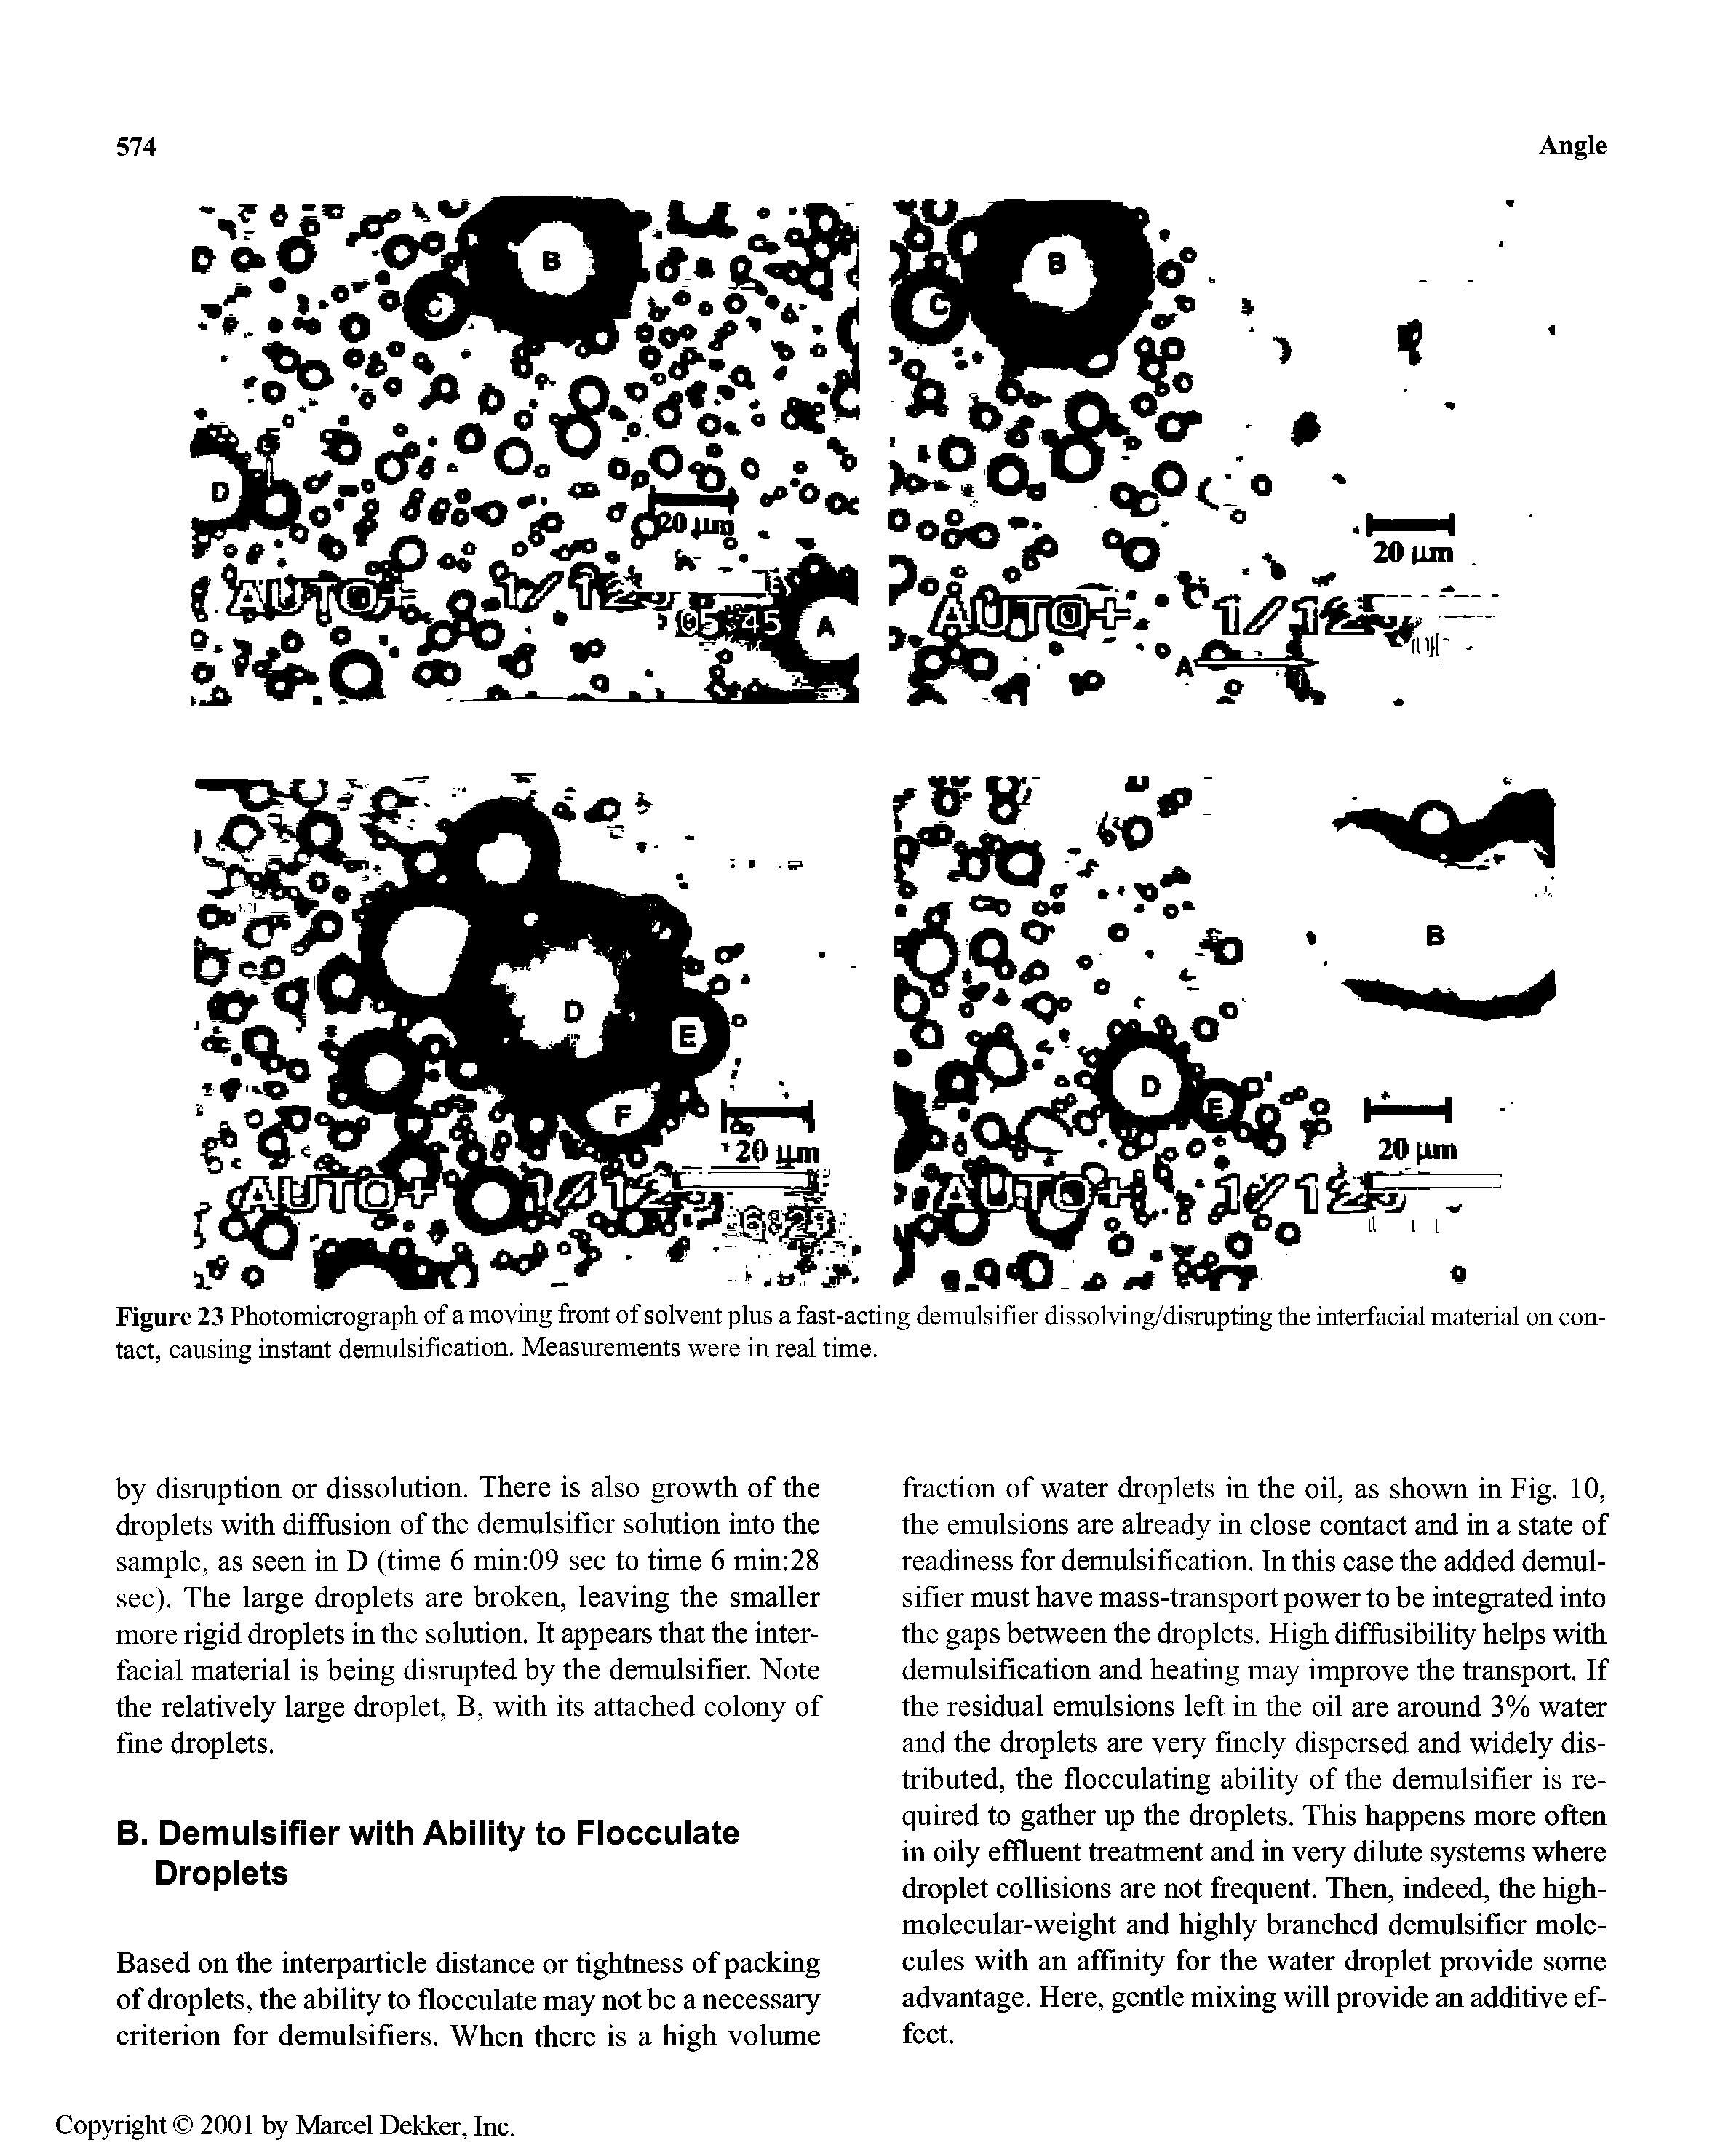 Figure 23 Photomicrograph of a moving front of solvent plus a fast-acting demulsifier dissolving/disrupting the interfacial material on contact, causing instant demulsification. Measurements were in real time.